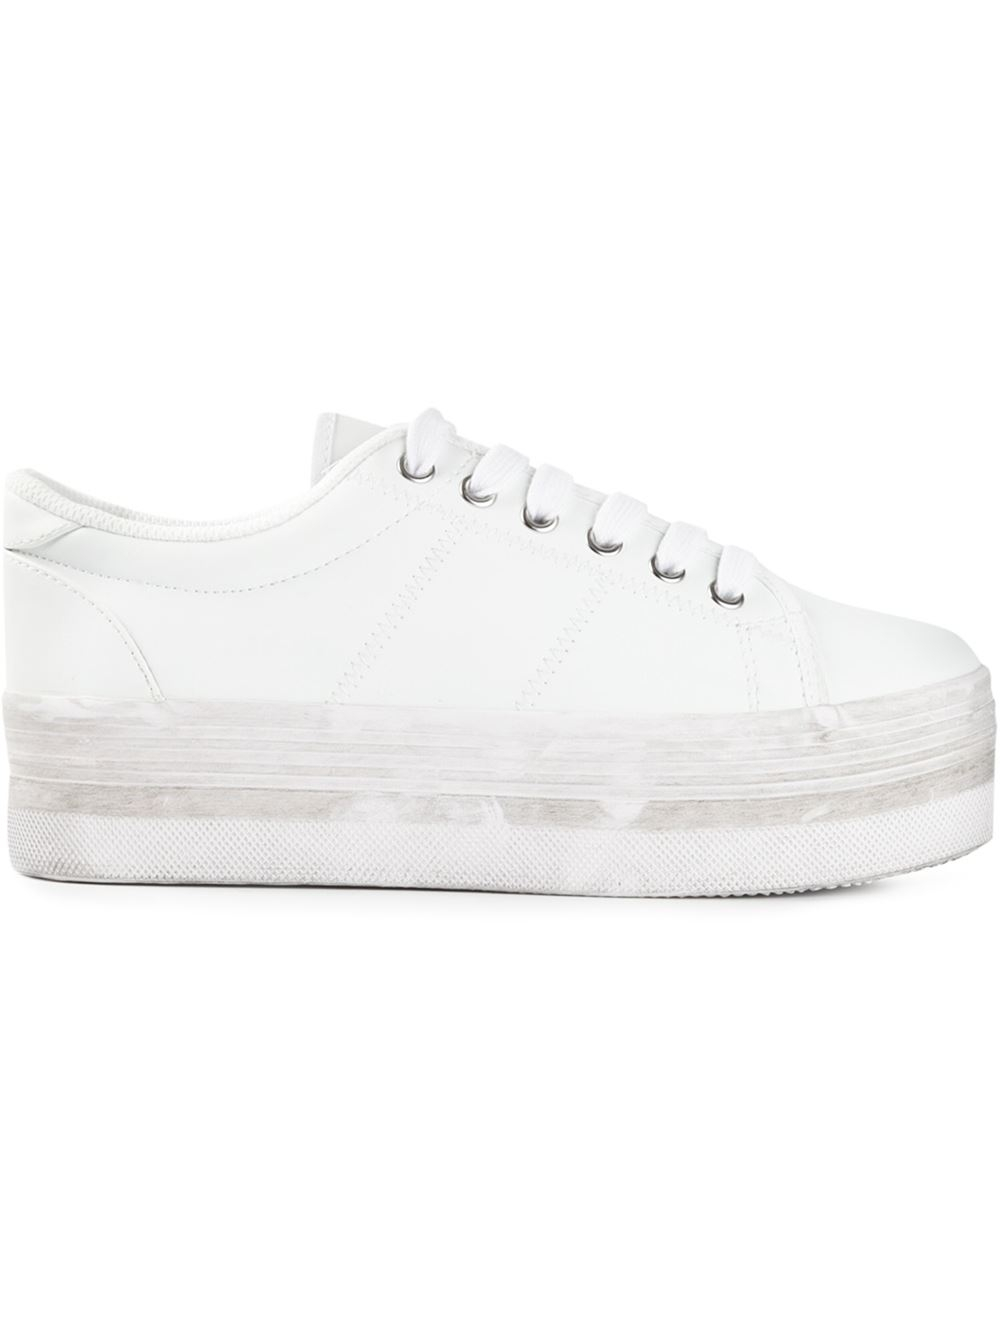 Jeffrey Campbell 'Zomg' Platform Sneakers in White | Lyst